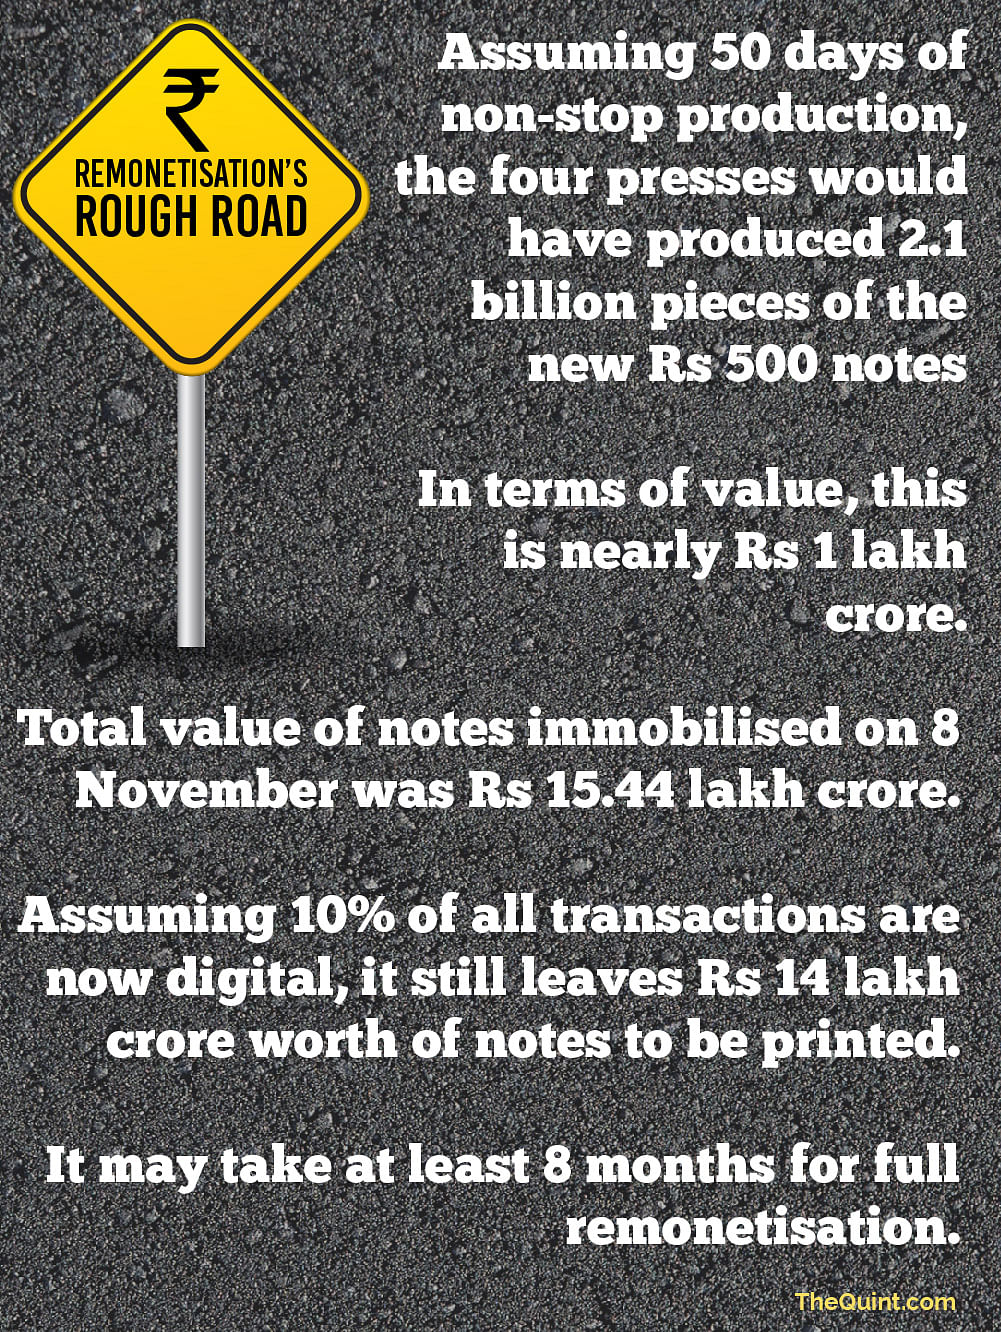 Unless there is a push to print  Rs 2,000 notes, the process of remonetisation may take months, argue the authors.